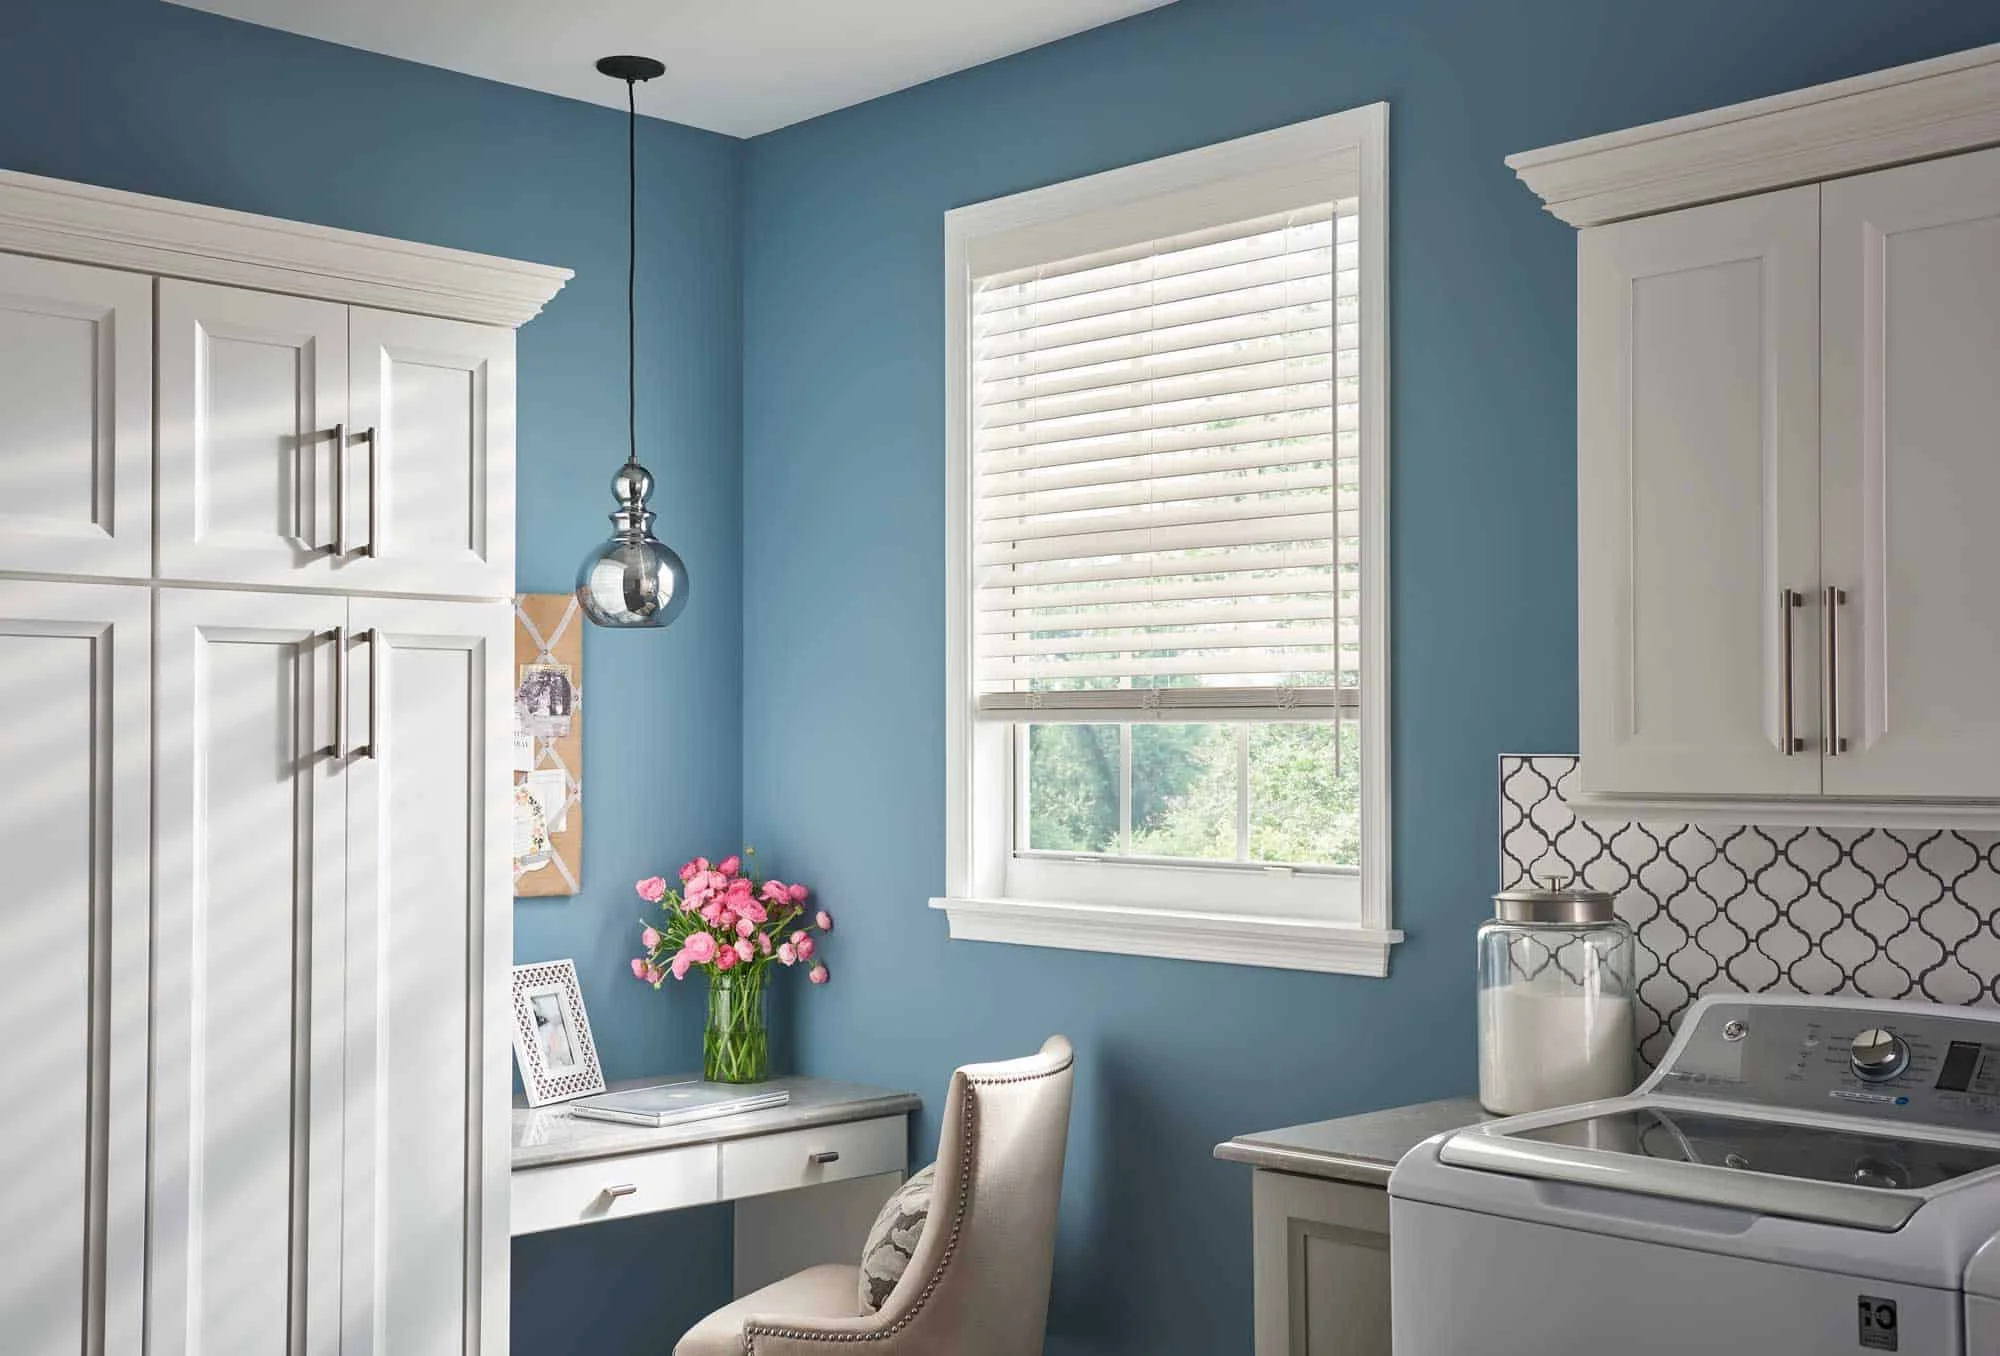 5 Reasons We Love Faux Wood Blinds – And Why You Should Too!